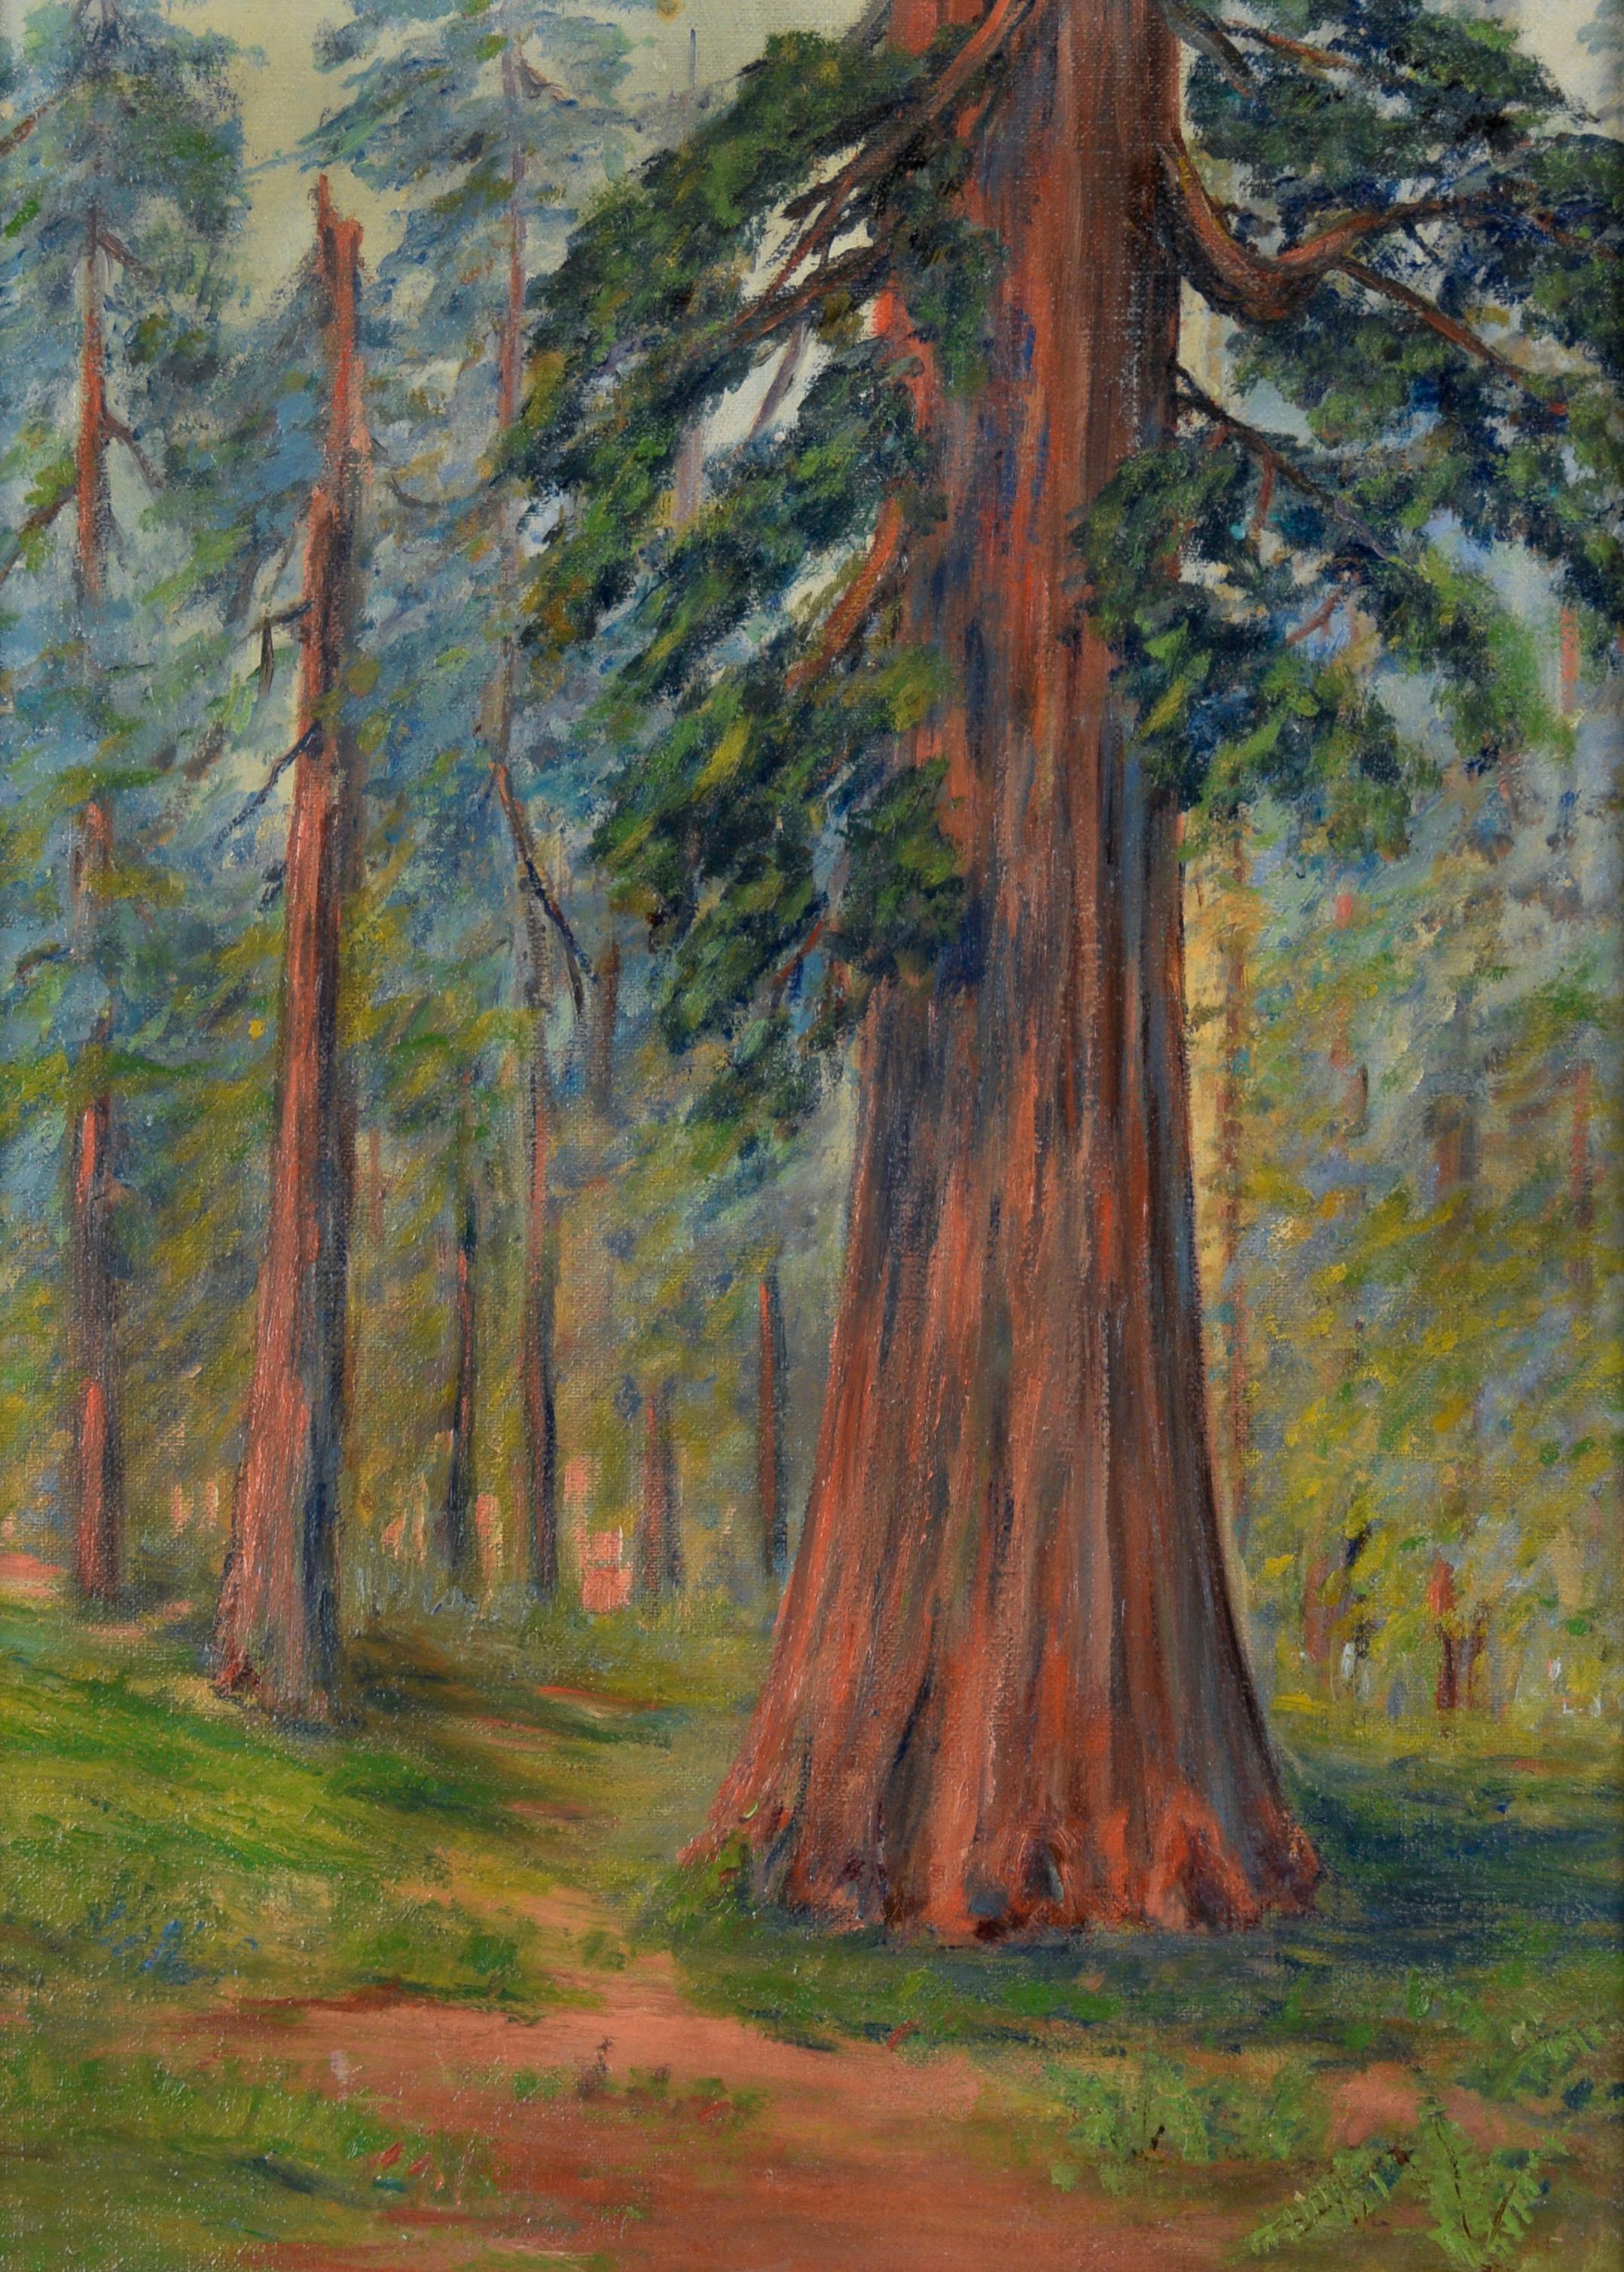 Through The Redwoods - California Impressionism Circa 1930s - American Impressionist Painting by California School